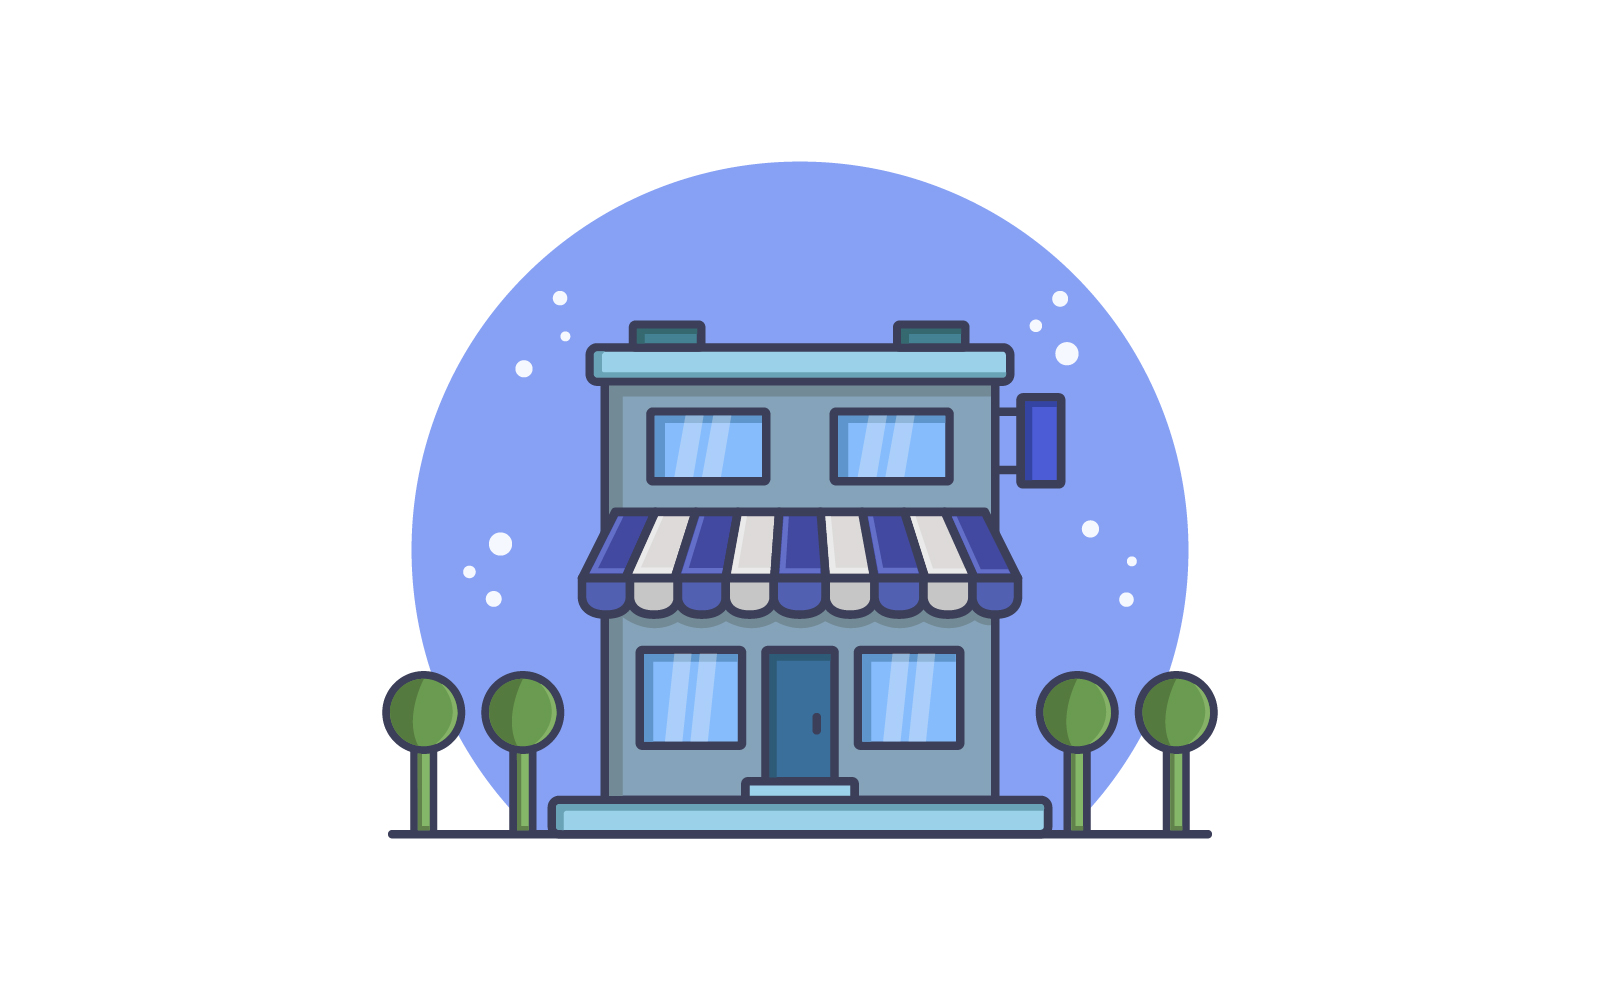 Shop illustrated in vector on a background